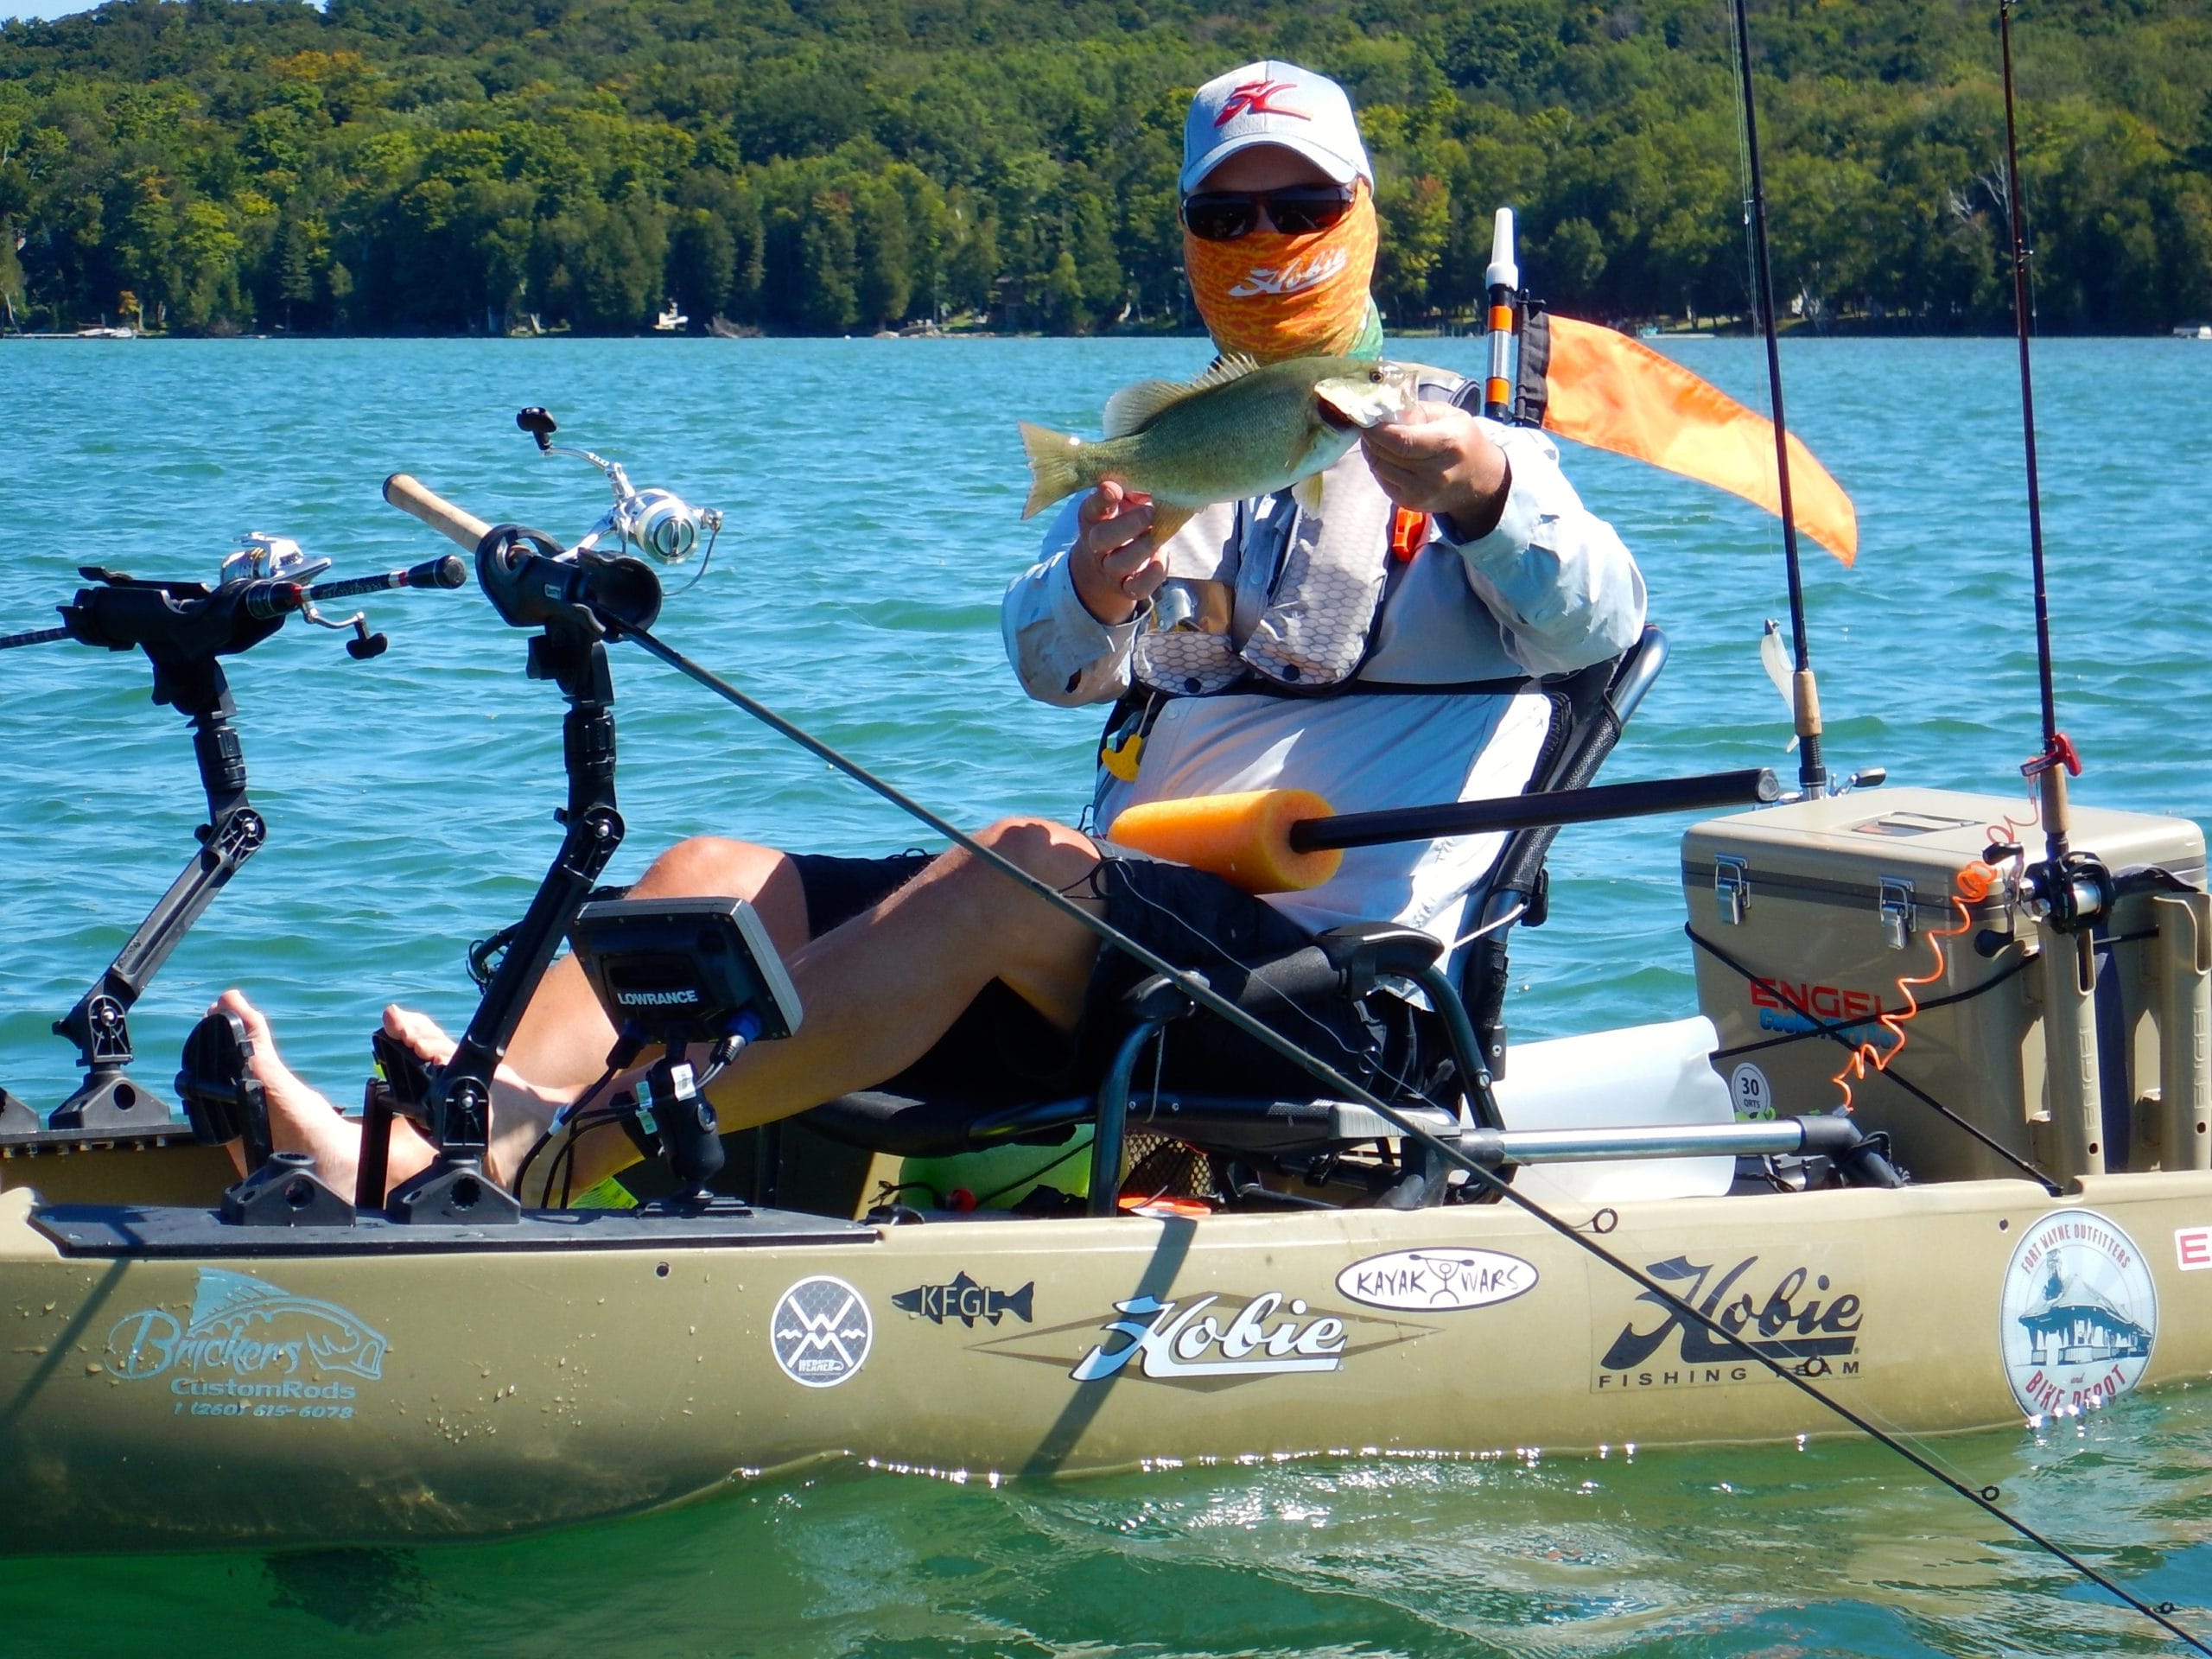 Trolling and fighting fish is easier when you don’t have to paddle, as this angler in a Hobie kayak with pedal-powered Mirage Drive has learned.